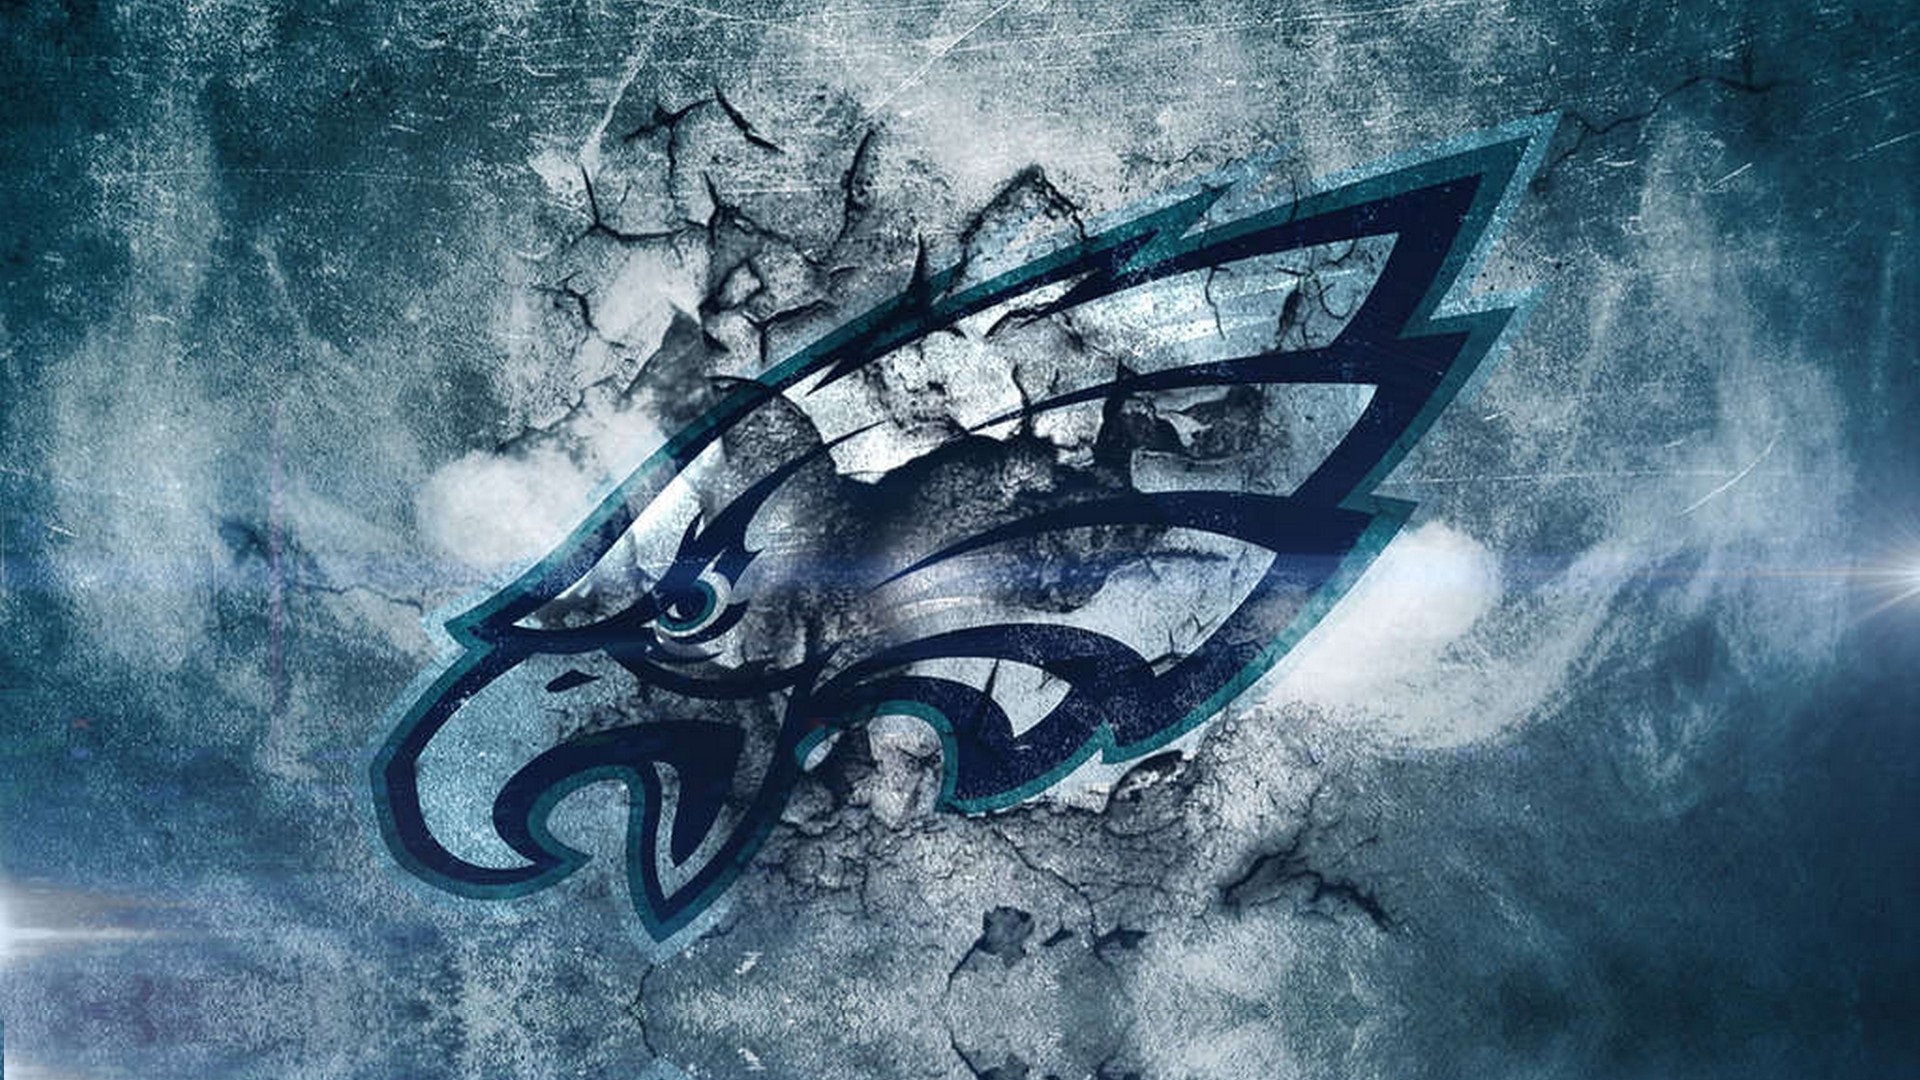 Wallpapers Philadelphia Eagles With Resolution 1920X1080 pixel. You can make this wallpaper for your Mac or Windows Desktop Background, iPhone, Android or Tablet and another Smartphone device for free